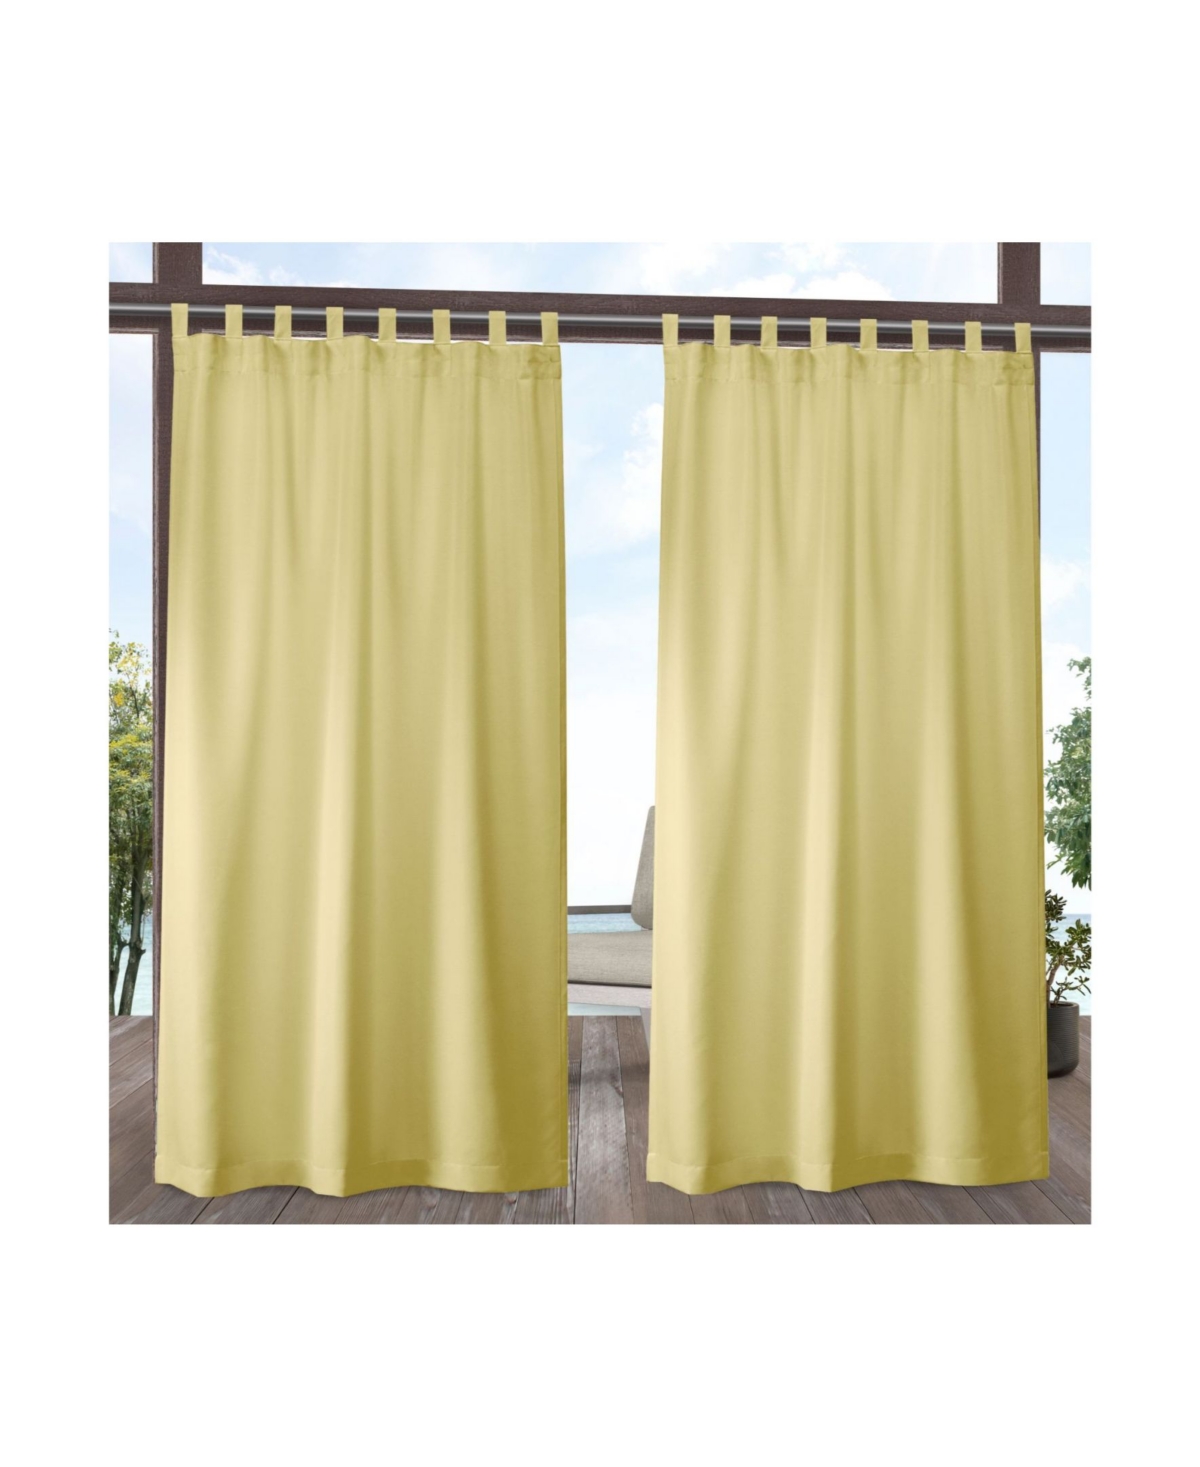 Curtains Indoor - Outdoor Solid Cabana Tab Top Curtain Panel Pair, 54" x 108" - Multi